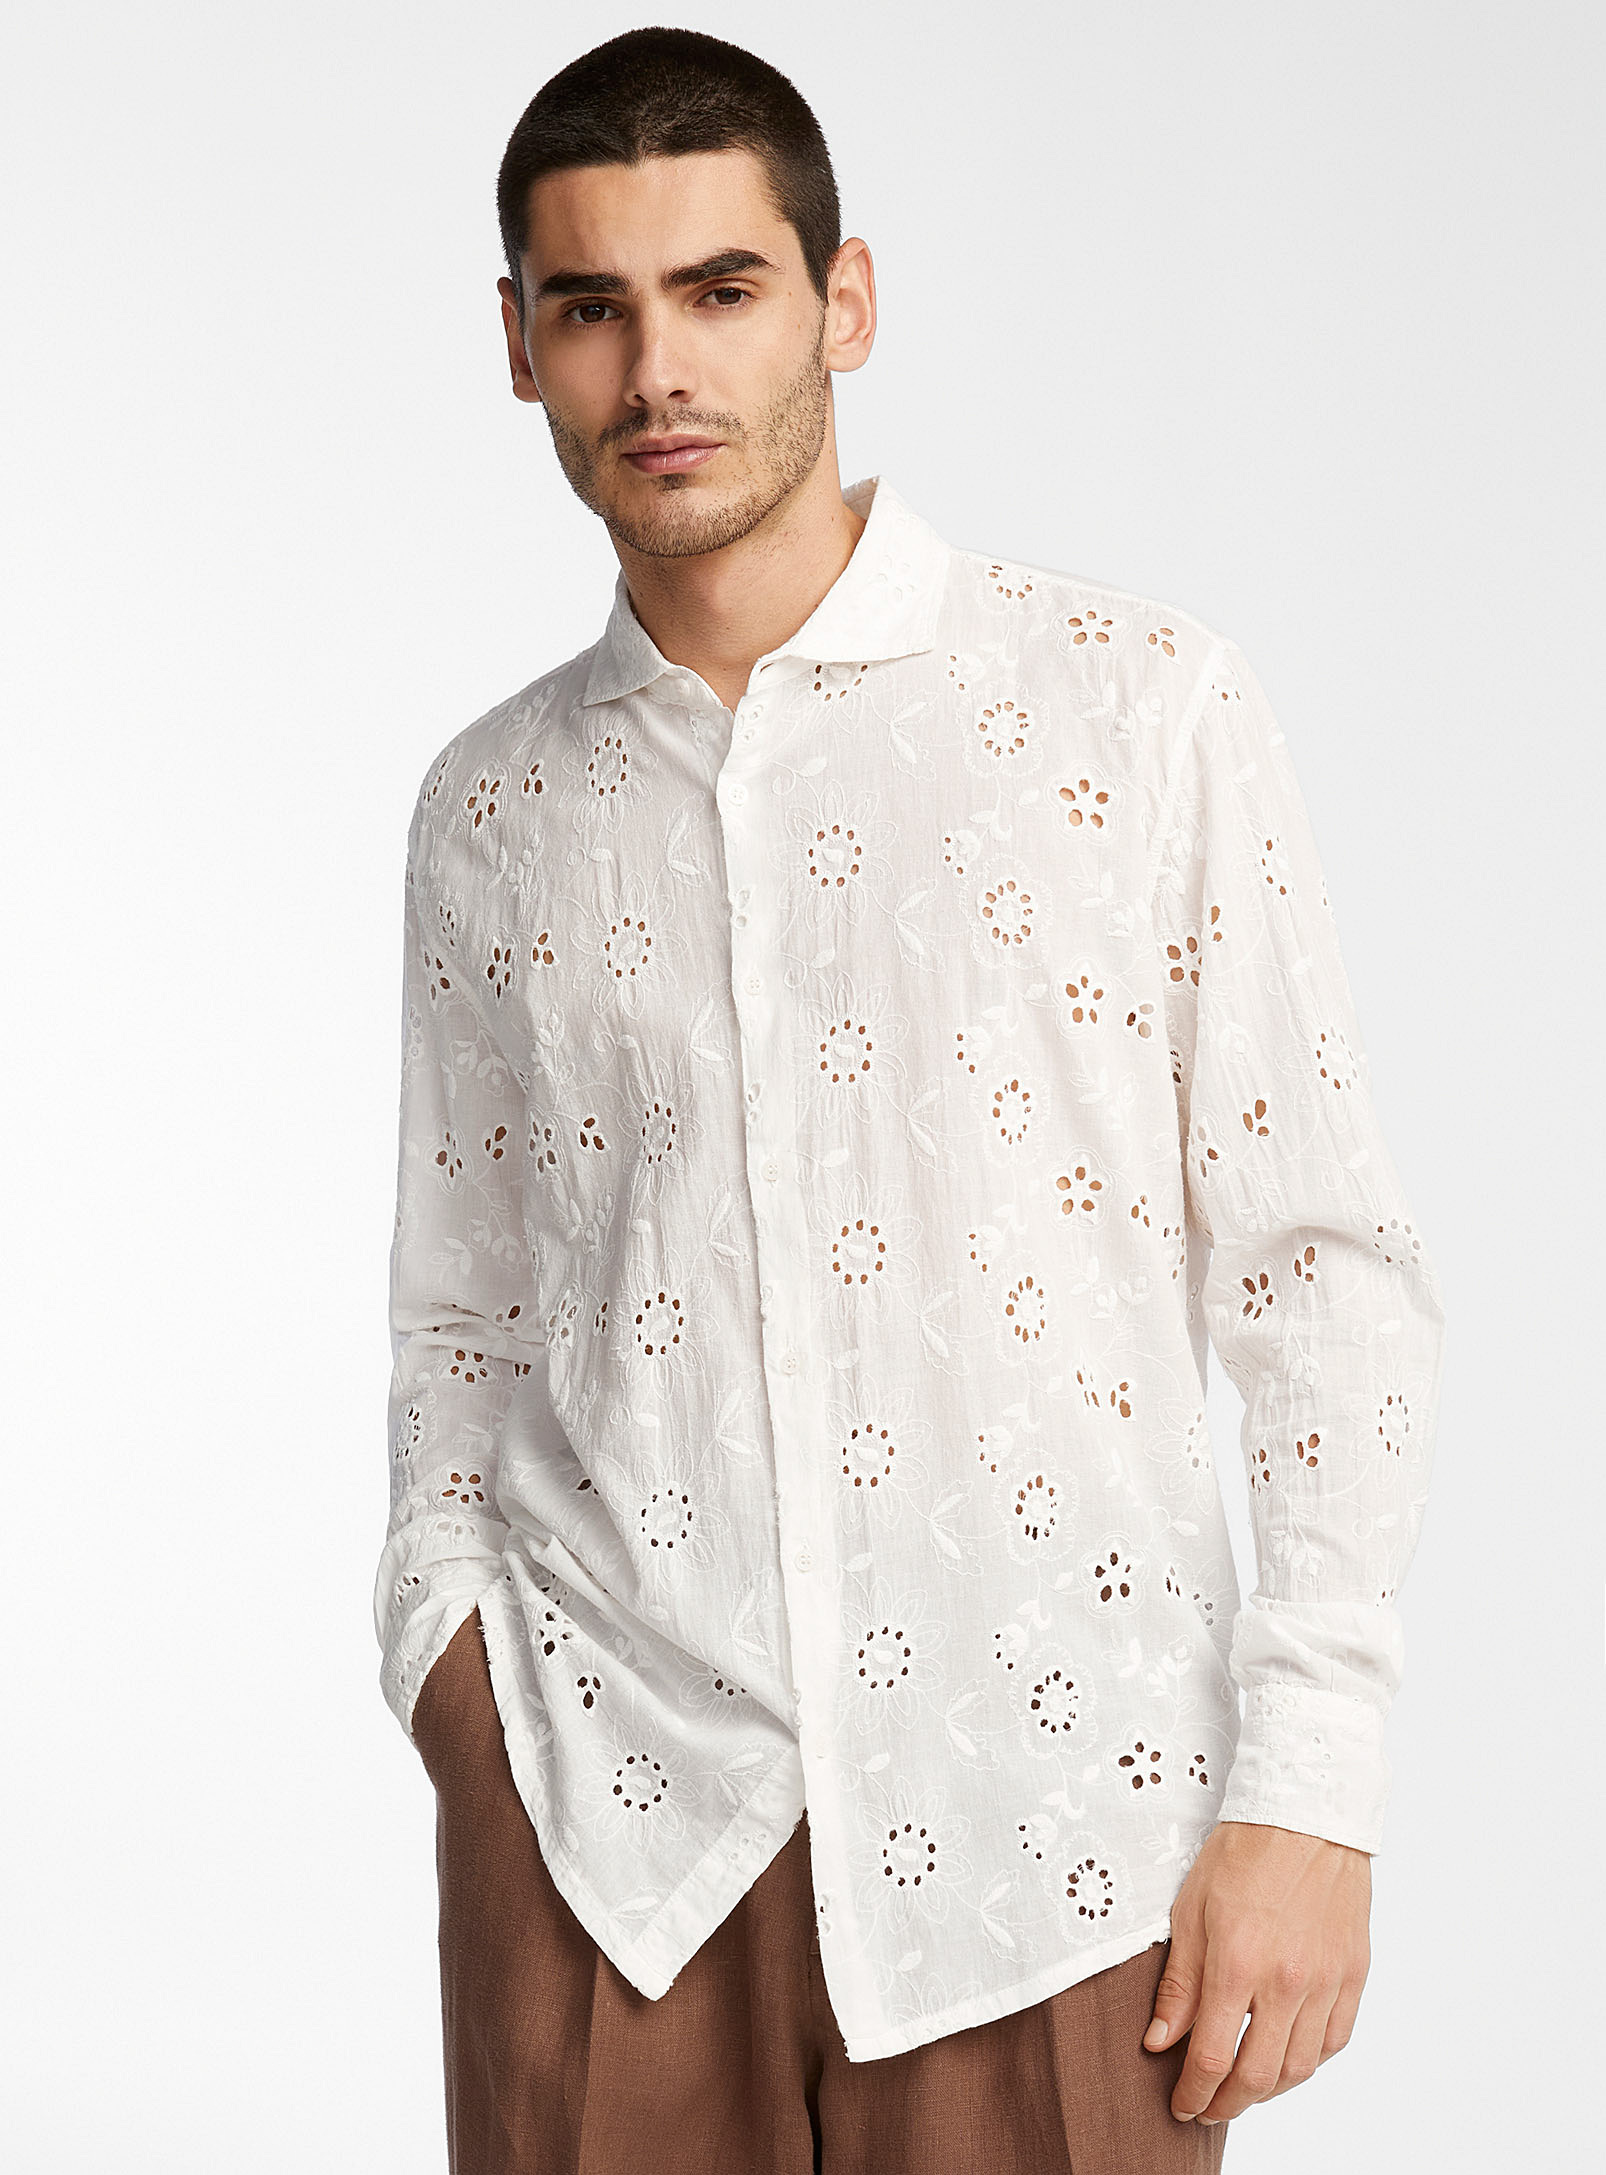 I'm Brian Floral Garden Broderie Anglaise Shirt In White